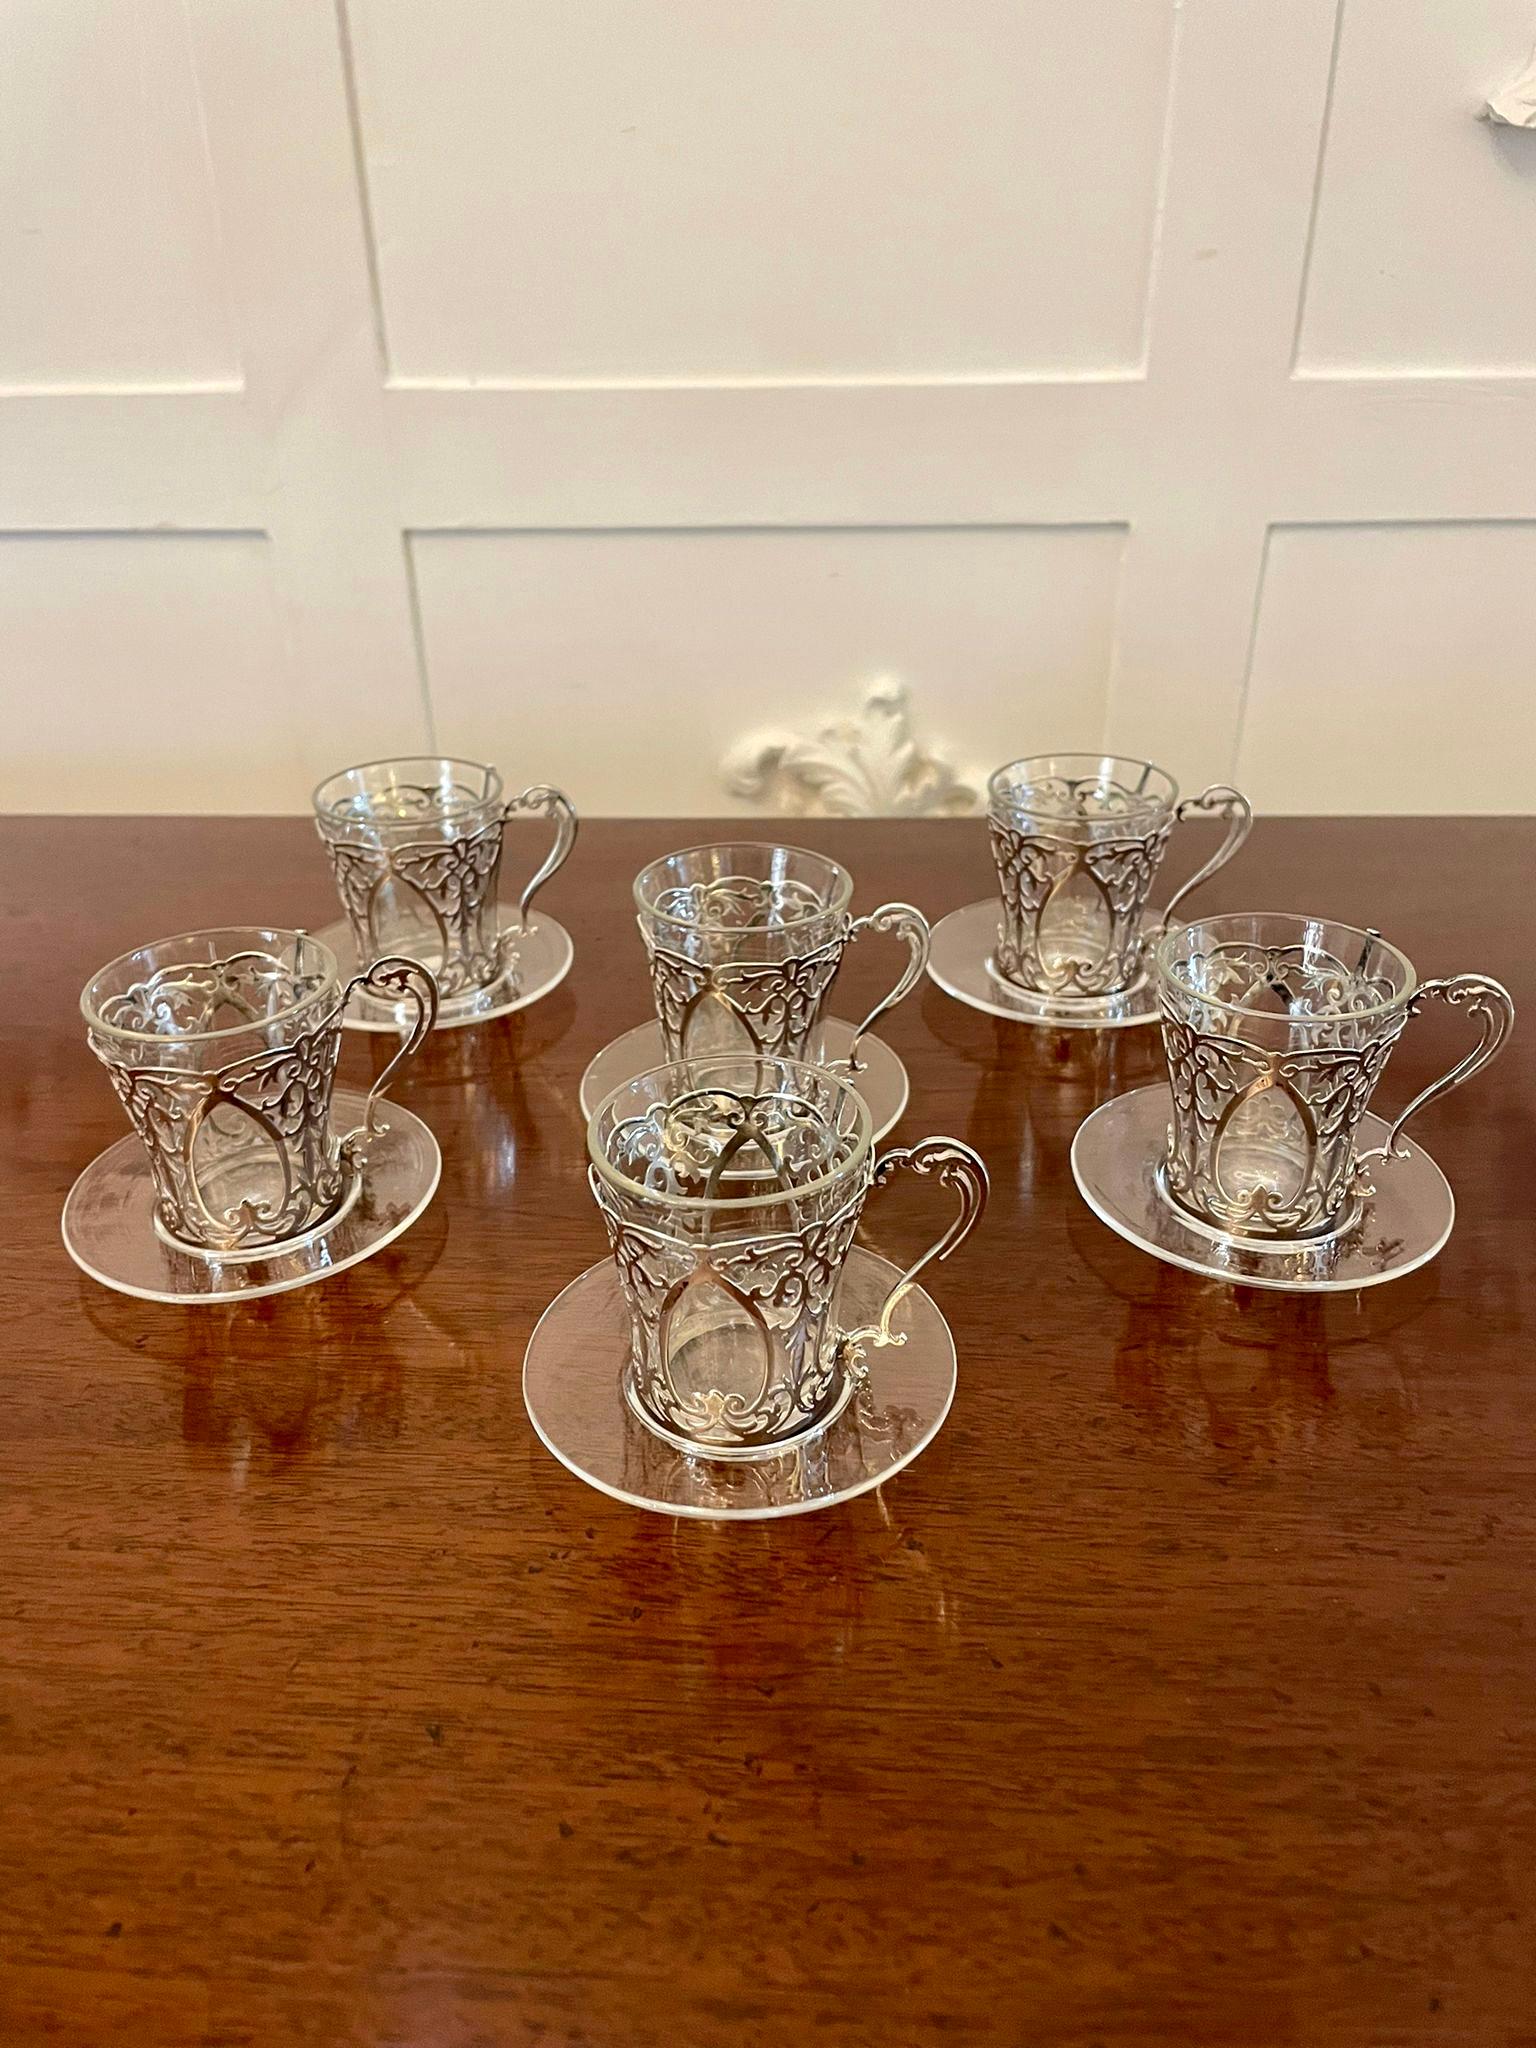 Fine quality set of 6 antique Edwardian solid silver and glass coffee cups
having pretty ornate solid silver coffee cup holders with glass inserts and glass saucers marked with the date 1910, London

An exquisite decorative set beautifully